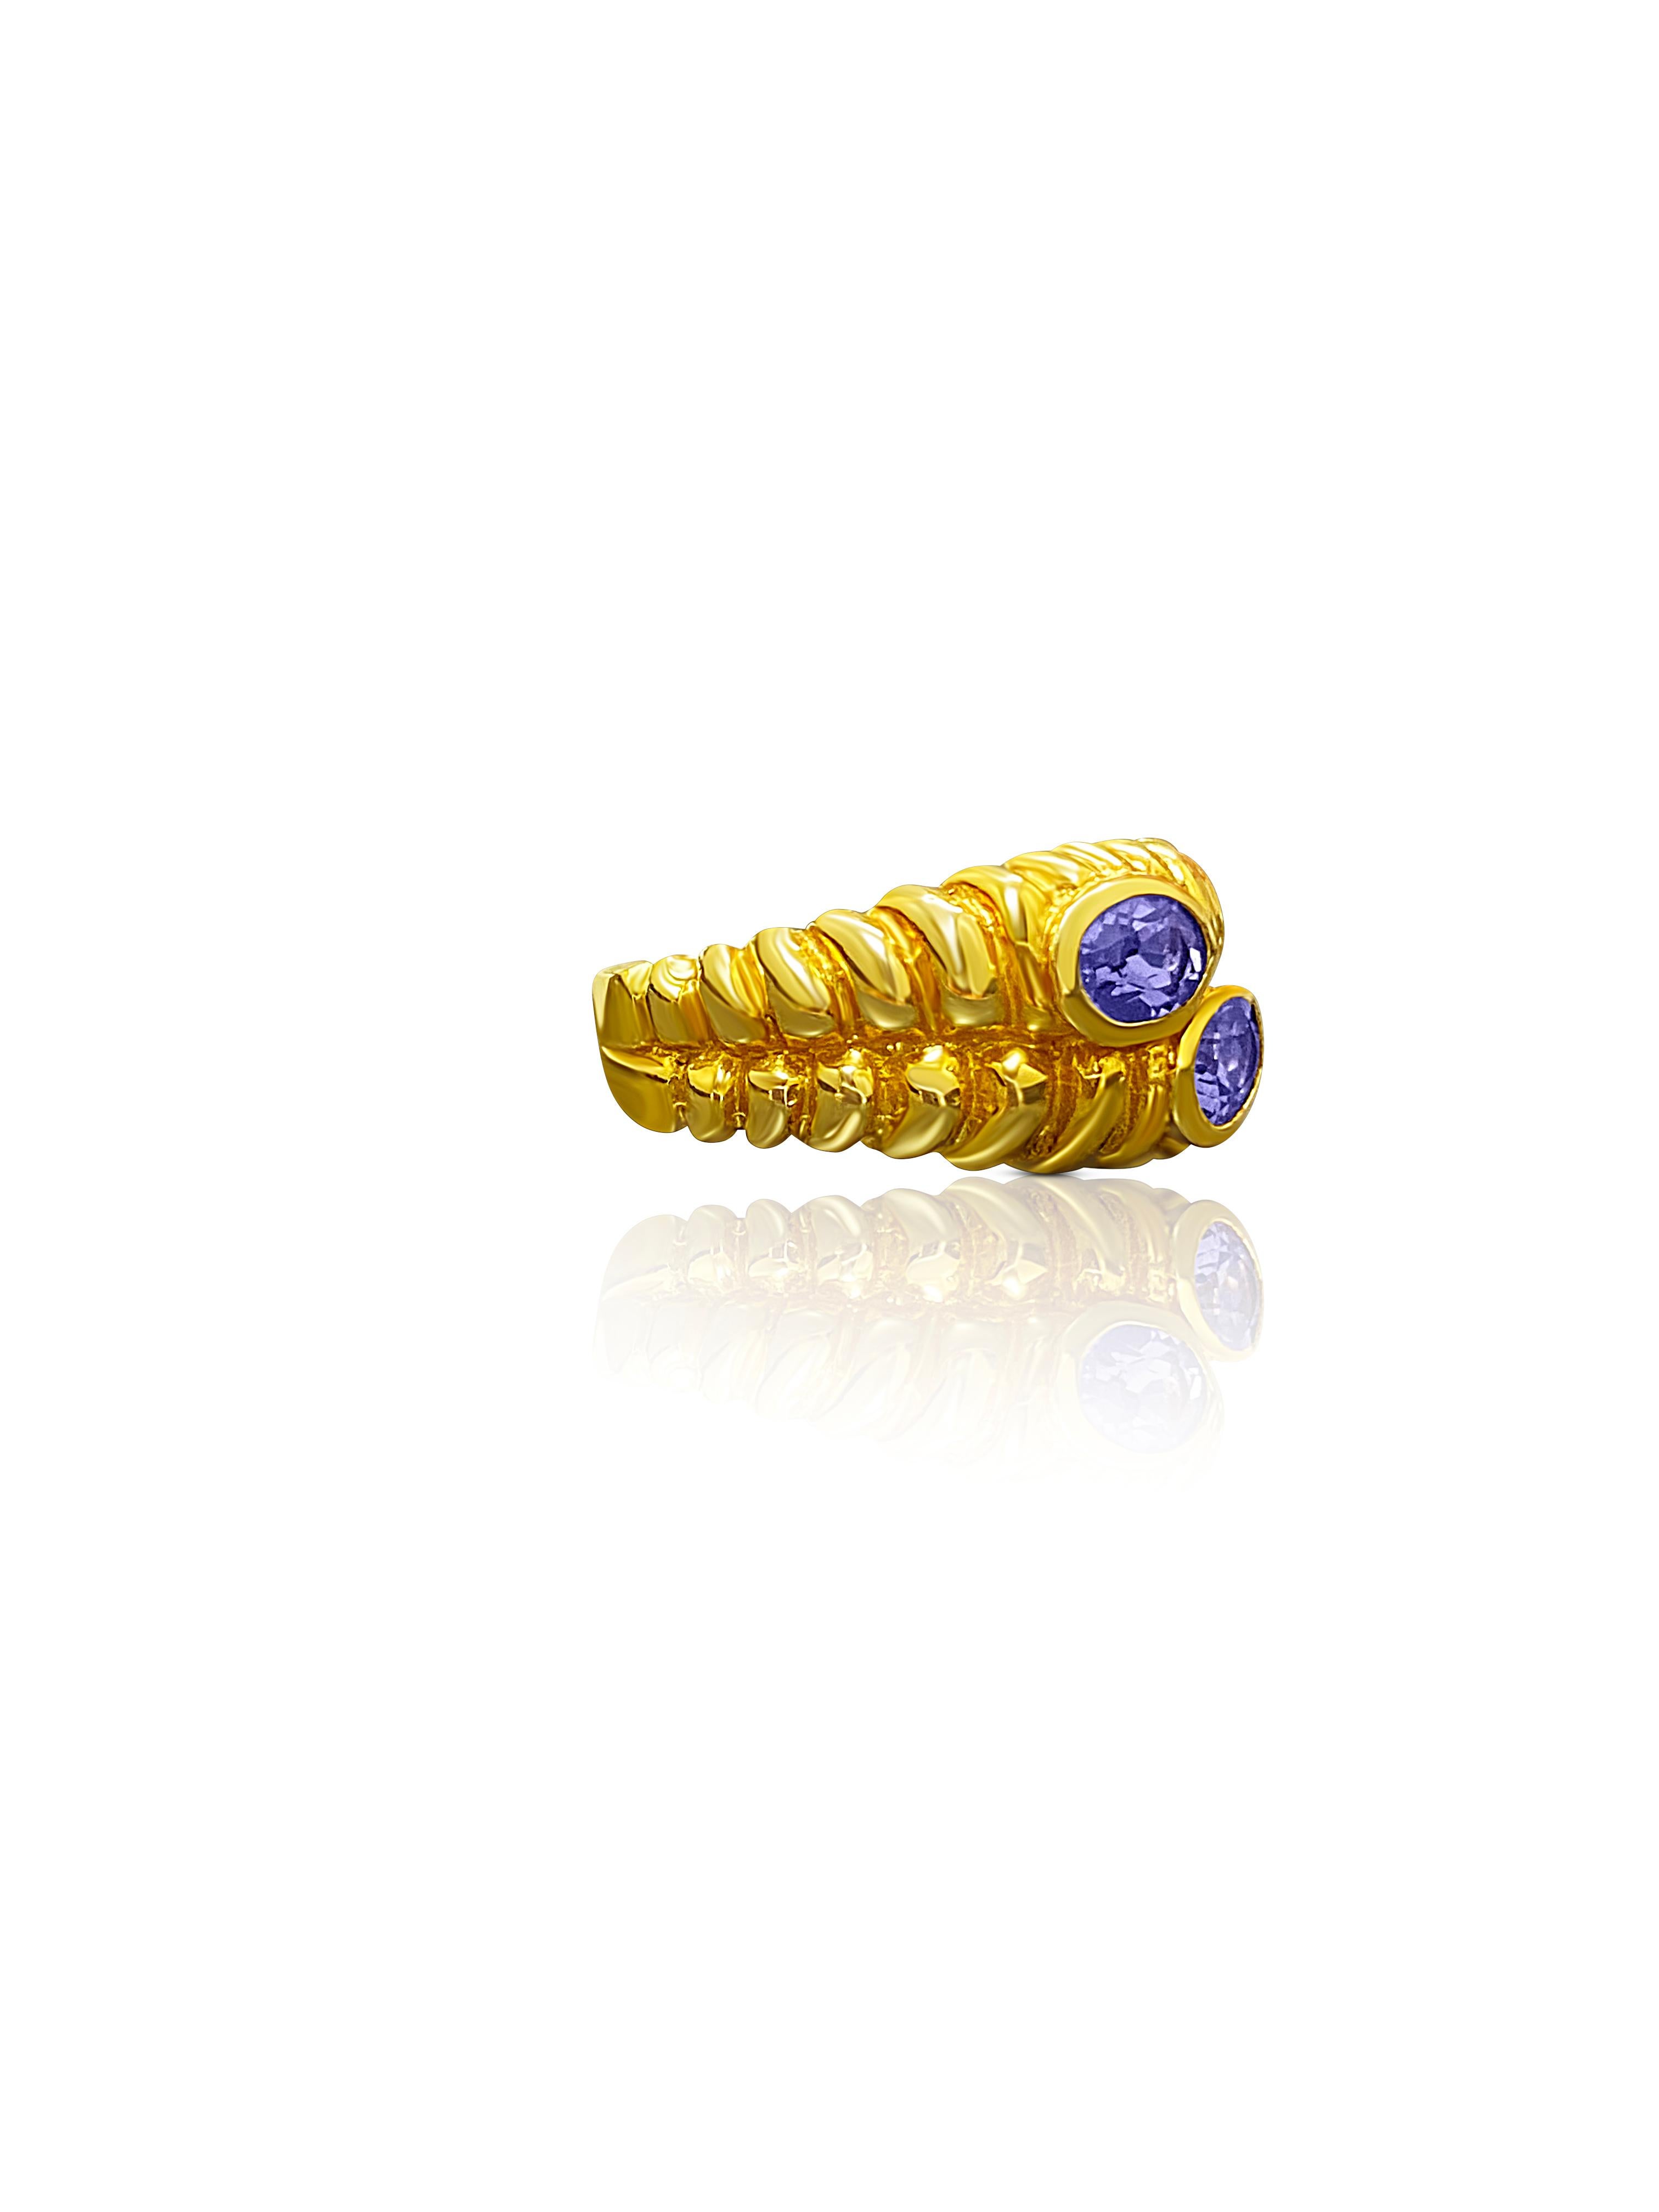 Centering twin Oval-Cut Tanzanites totaling 0.80 Carats and set in 14K Yellow Gold.

Details: 
✔ Stone: Tanzanite
✔ Tanzanite Weight: 0.80 carats (total weight)
✔ Tanzanite Cut: Oval
✔ Stone Origin: Tanzania
✔ Ring: 14K 